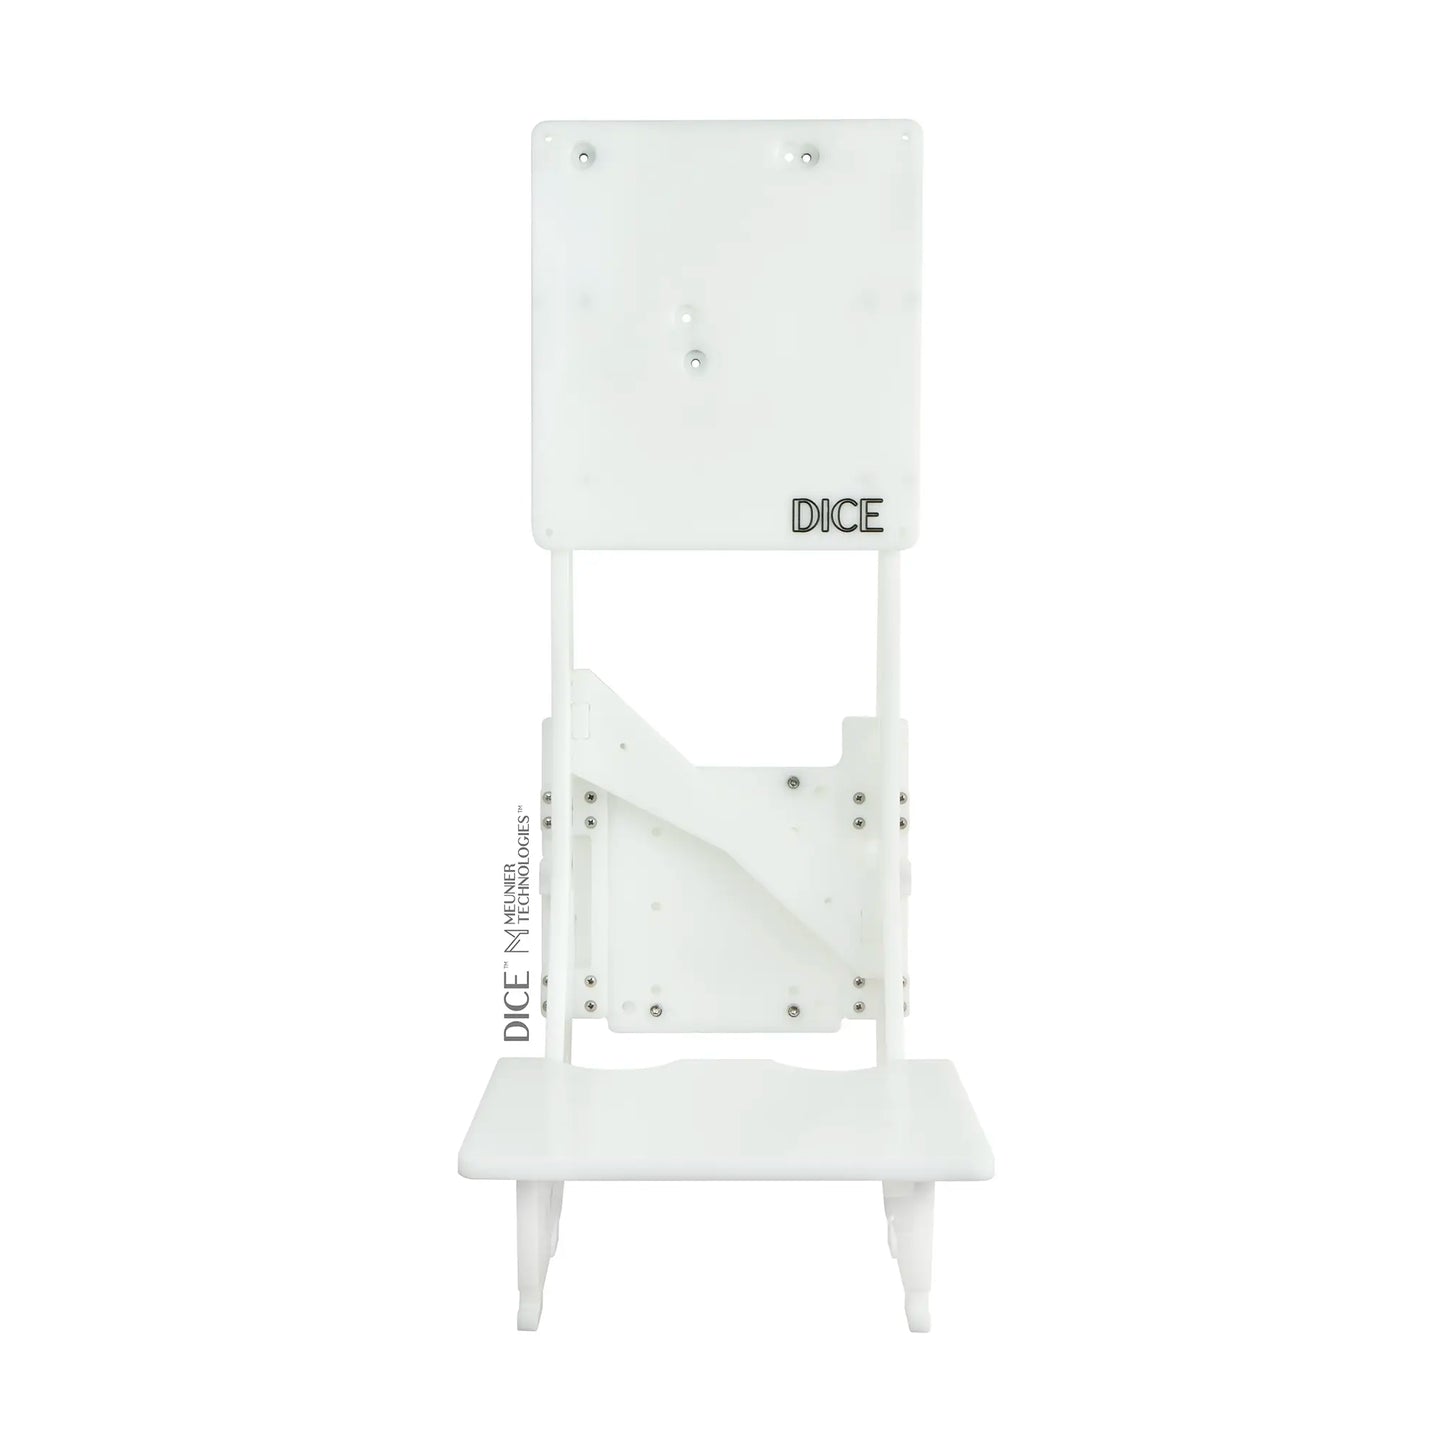 DICE™ Panel Self Supported & Wall Mount